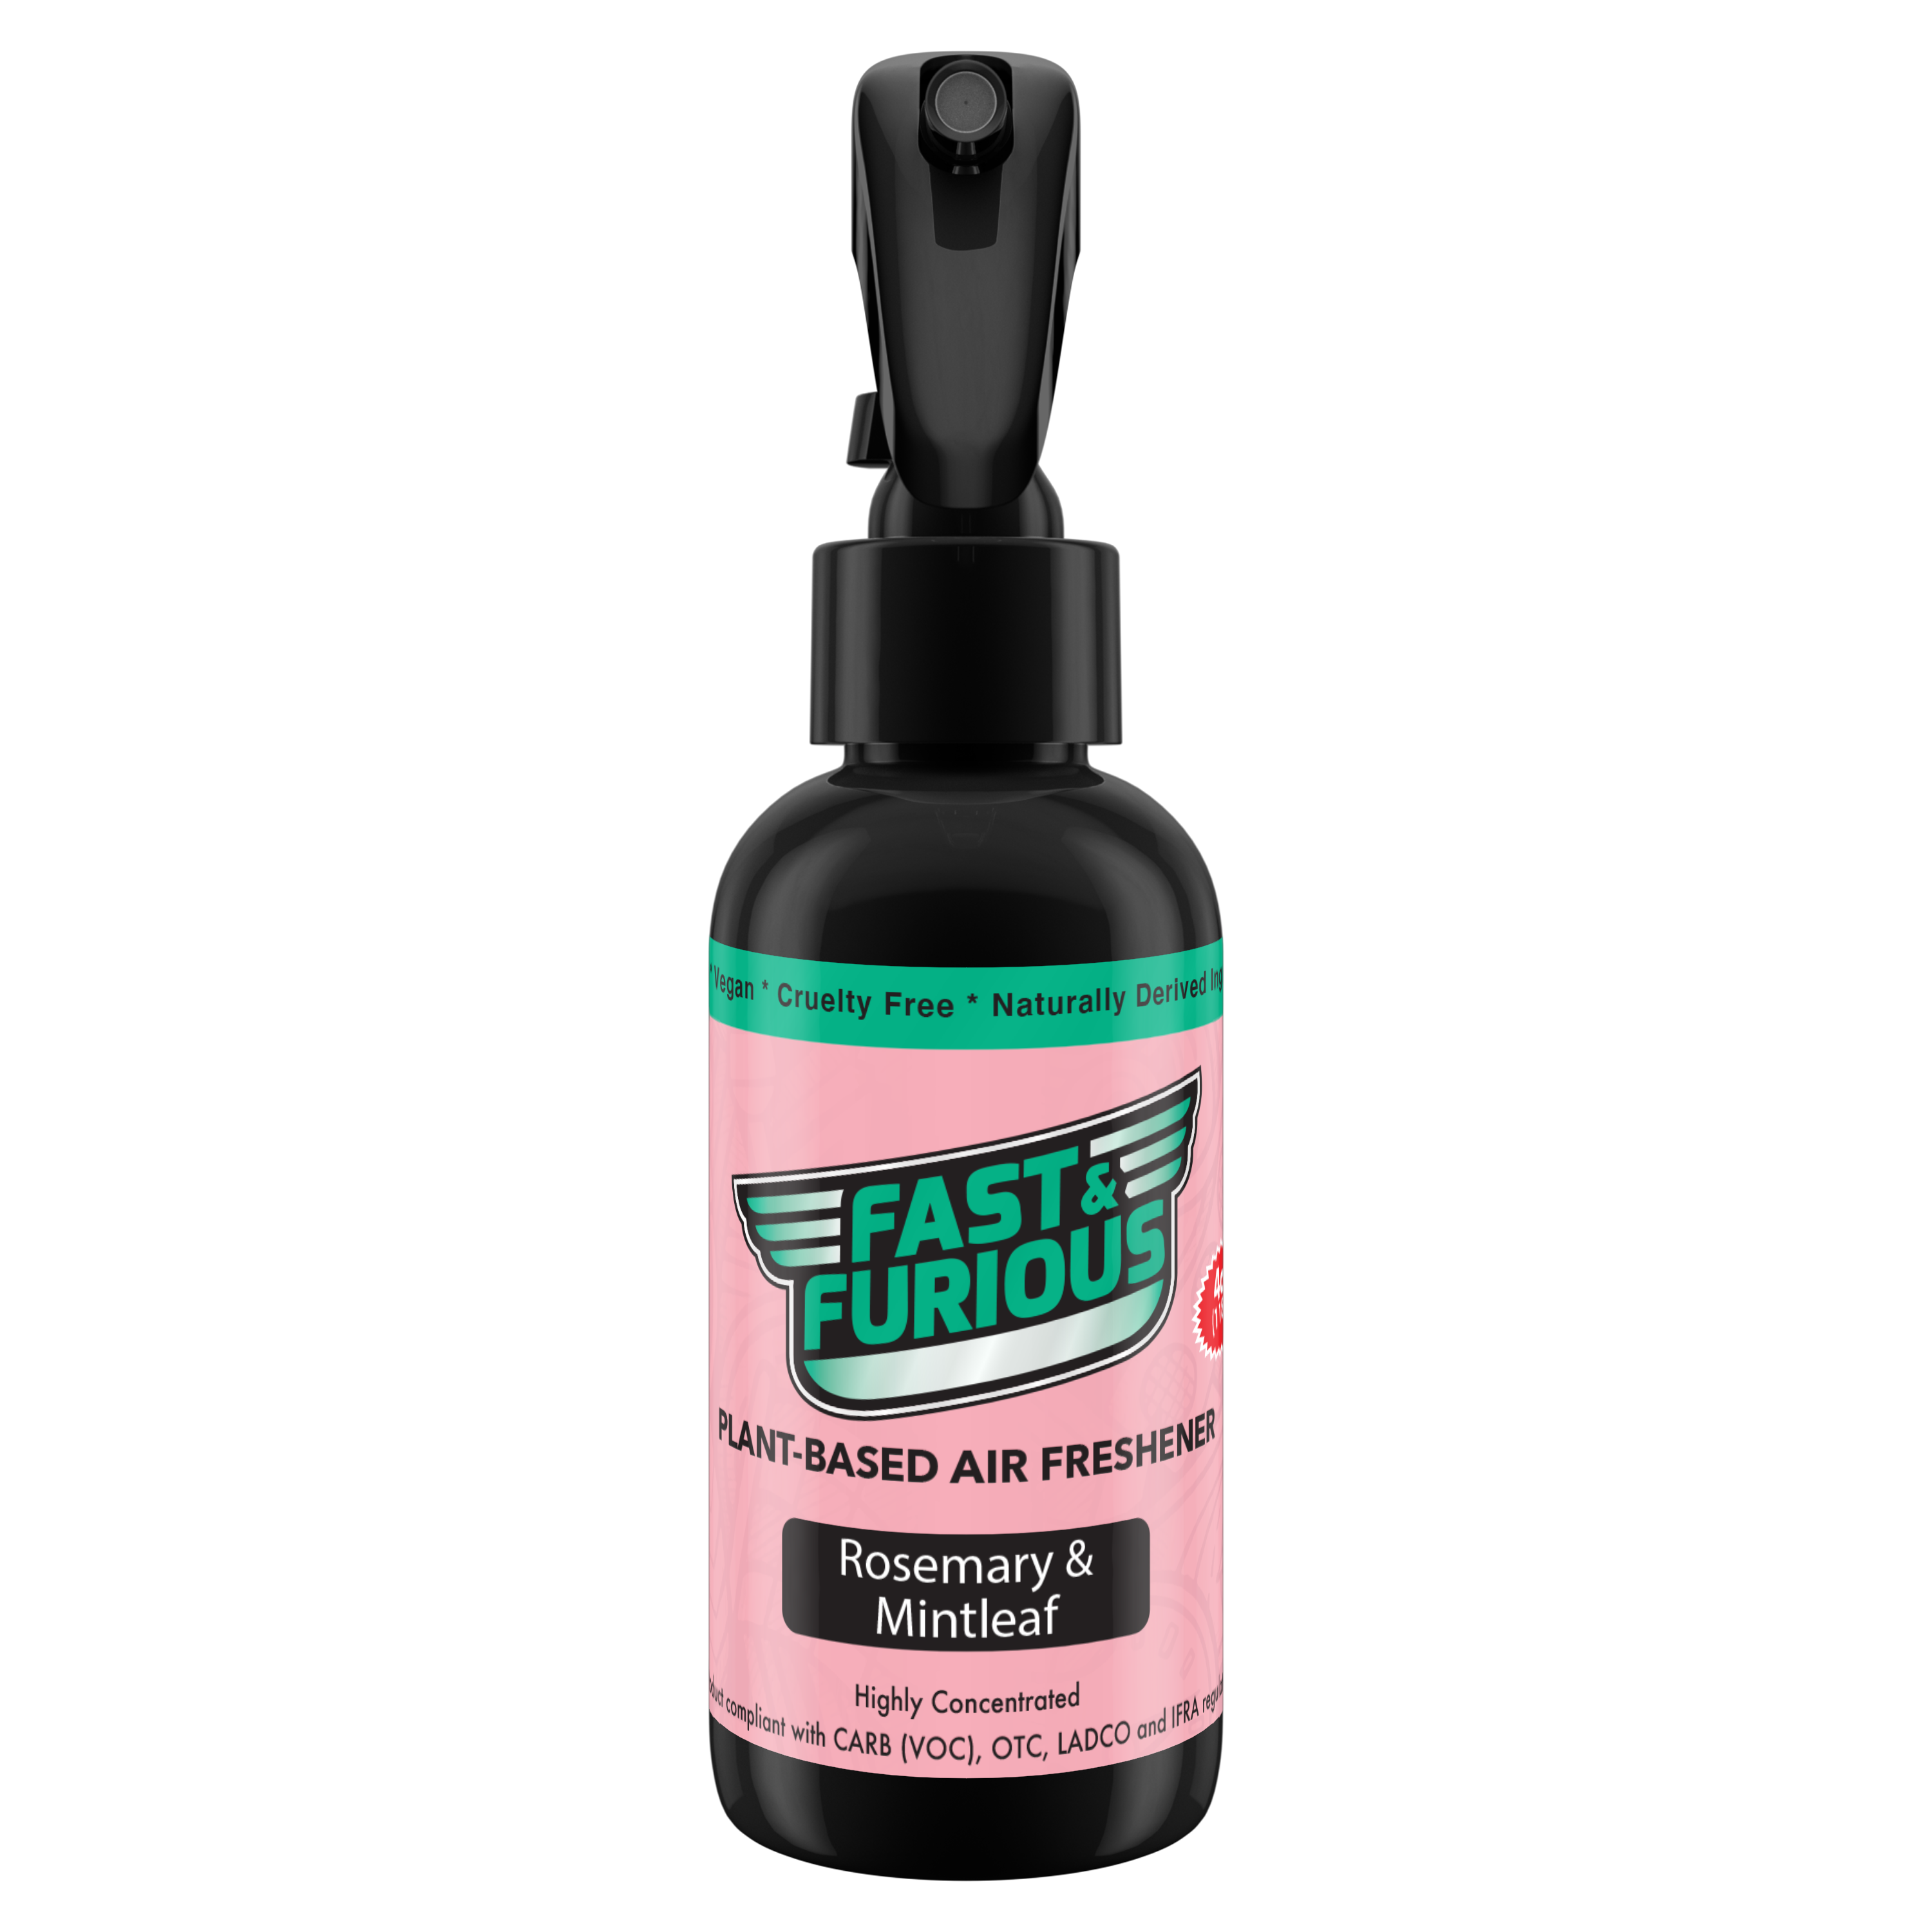 Fast and Furious Plant-Based Air Freshener - Rosemary & Mintleaf Scent